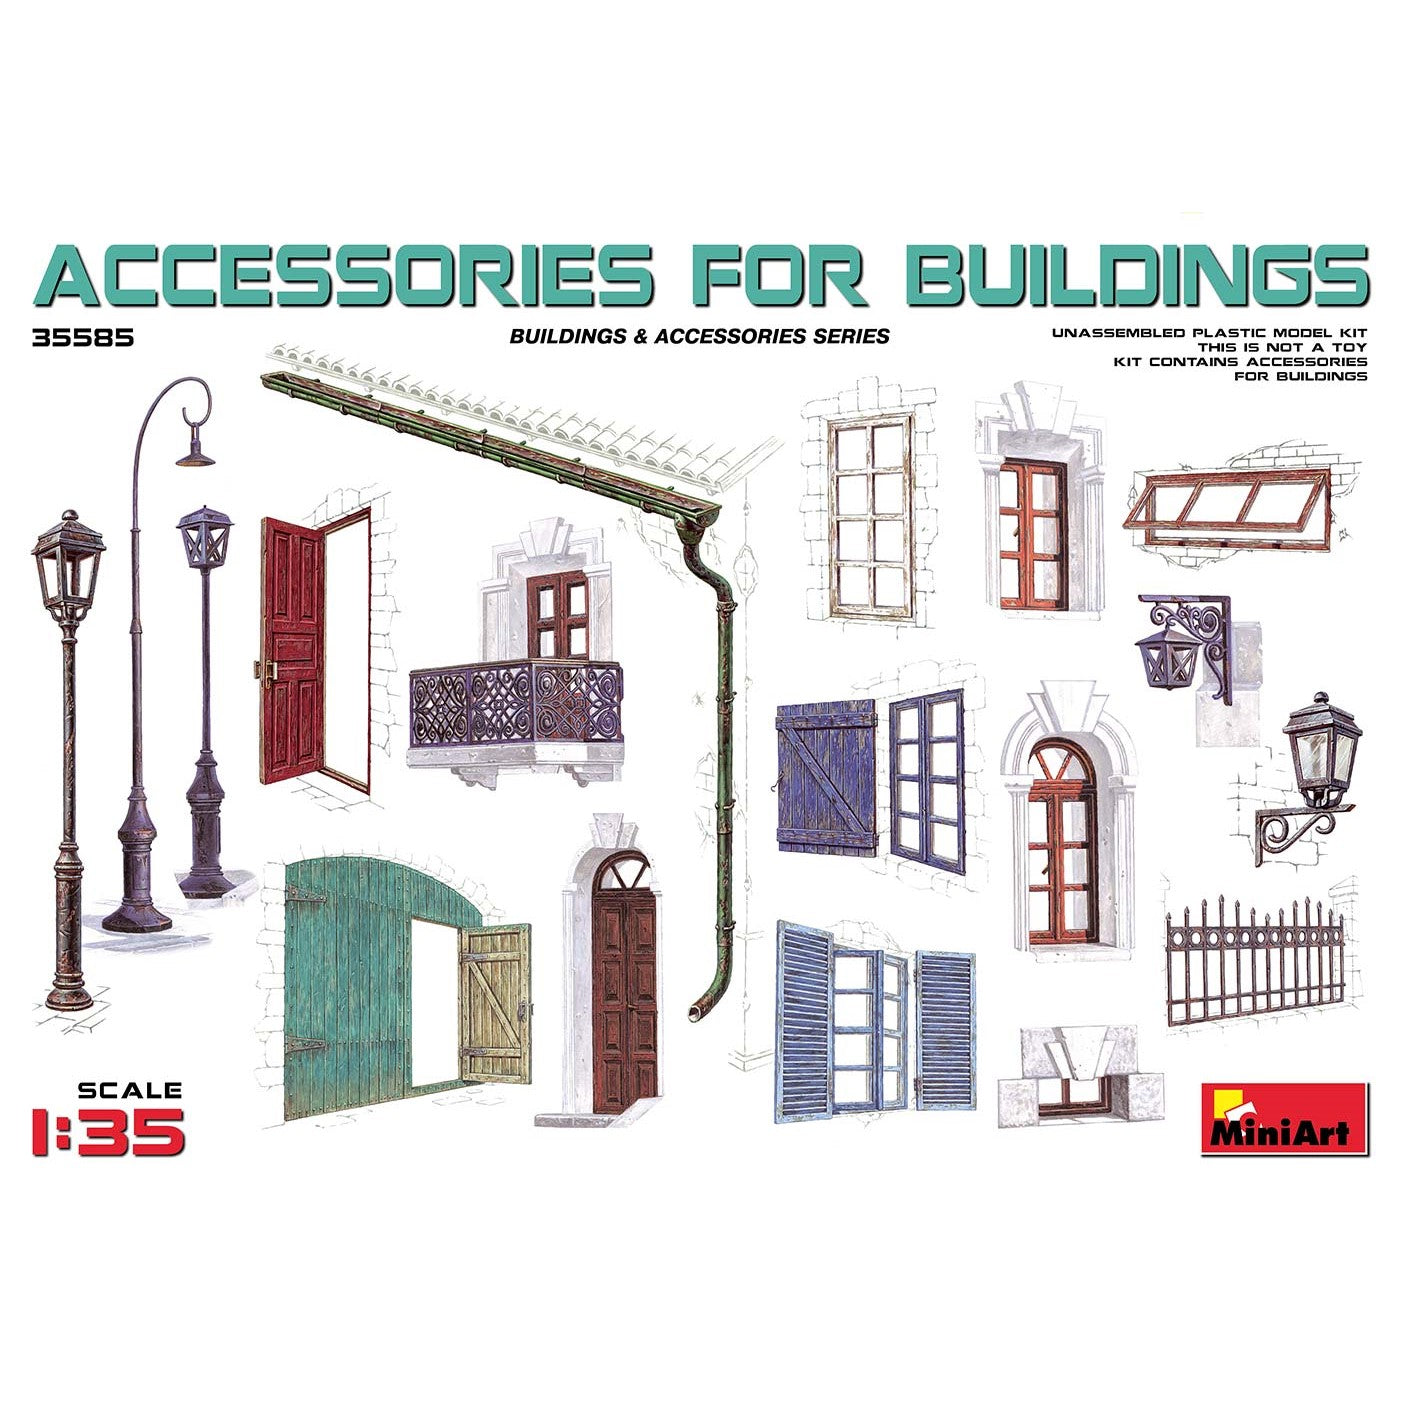 MiniArt 1/35 Accessories for Buildings 35585